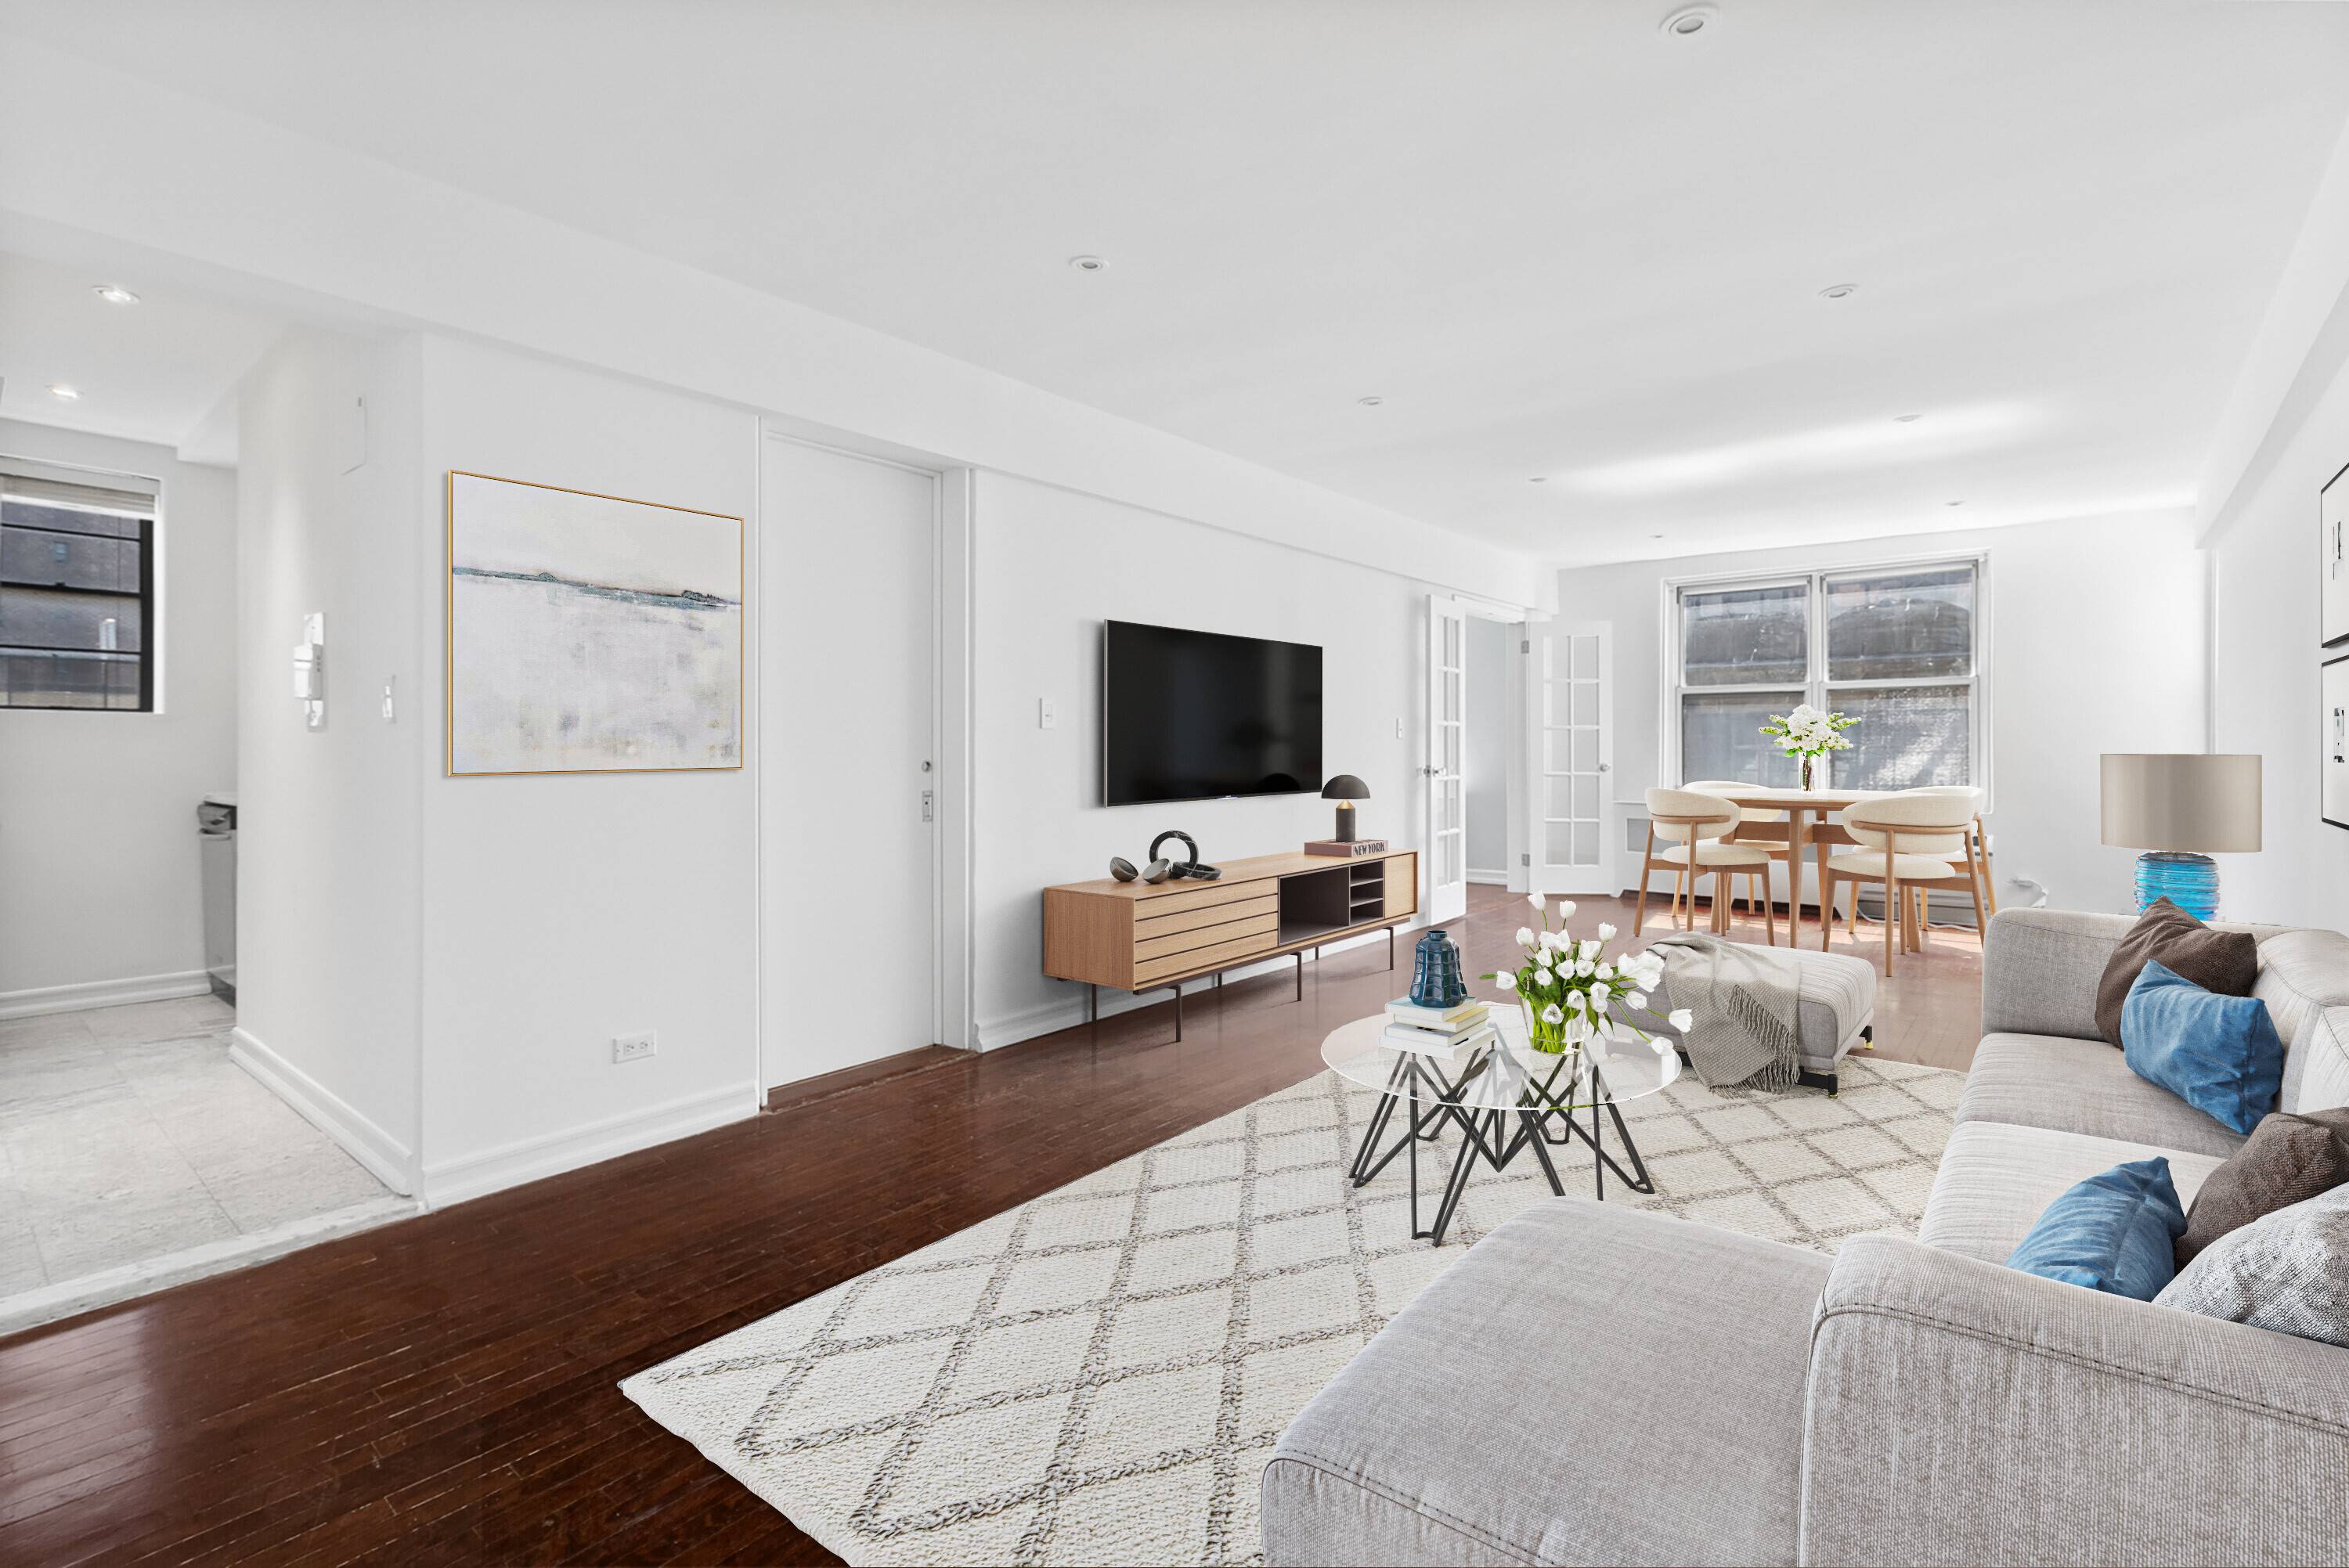 Experience abundant sunlight in this fully renovated, top floor one bedroom residence nestled in the vibrant heart of Midtown.